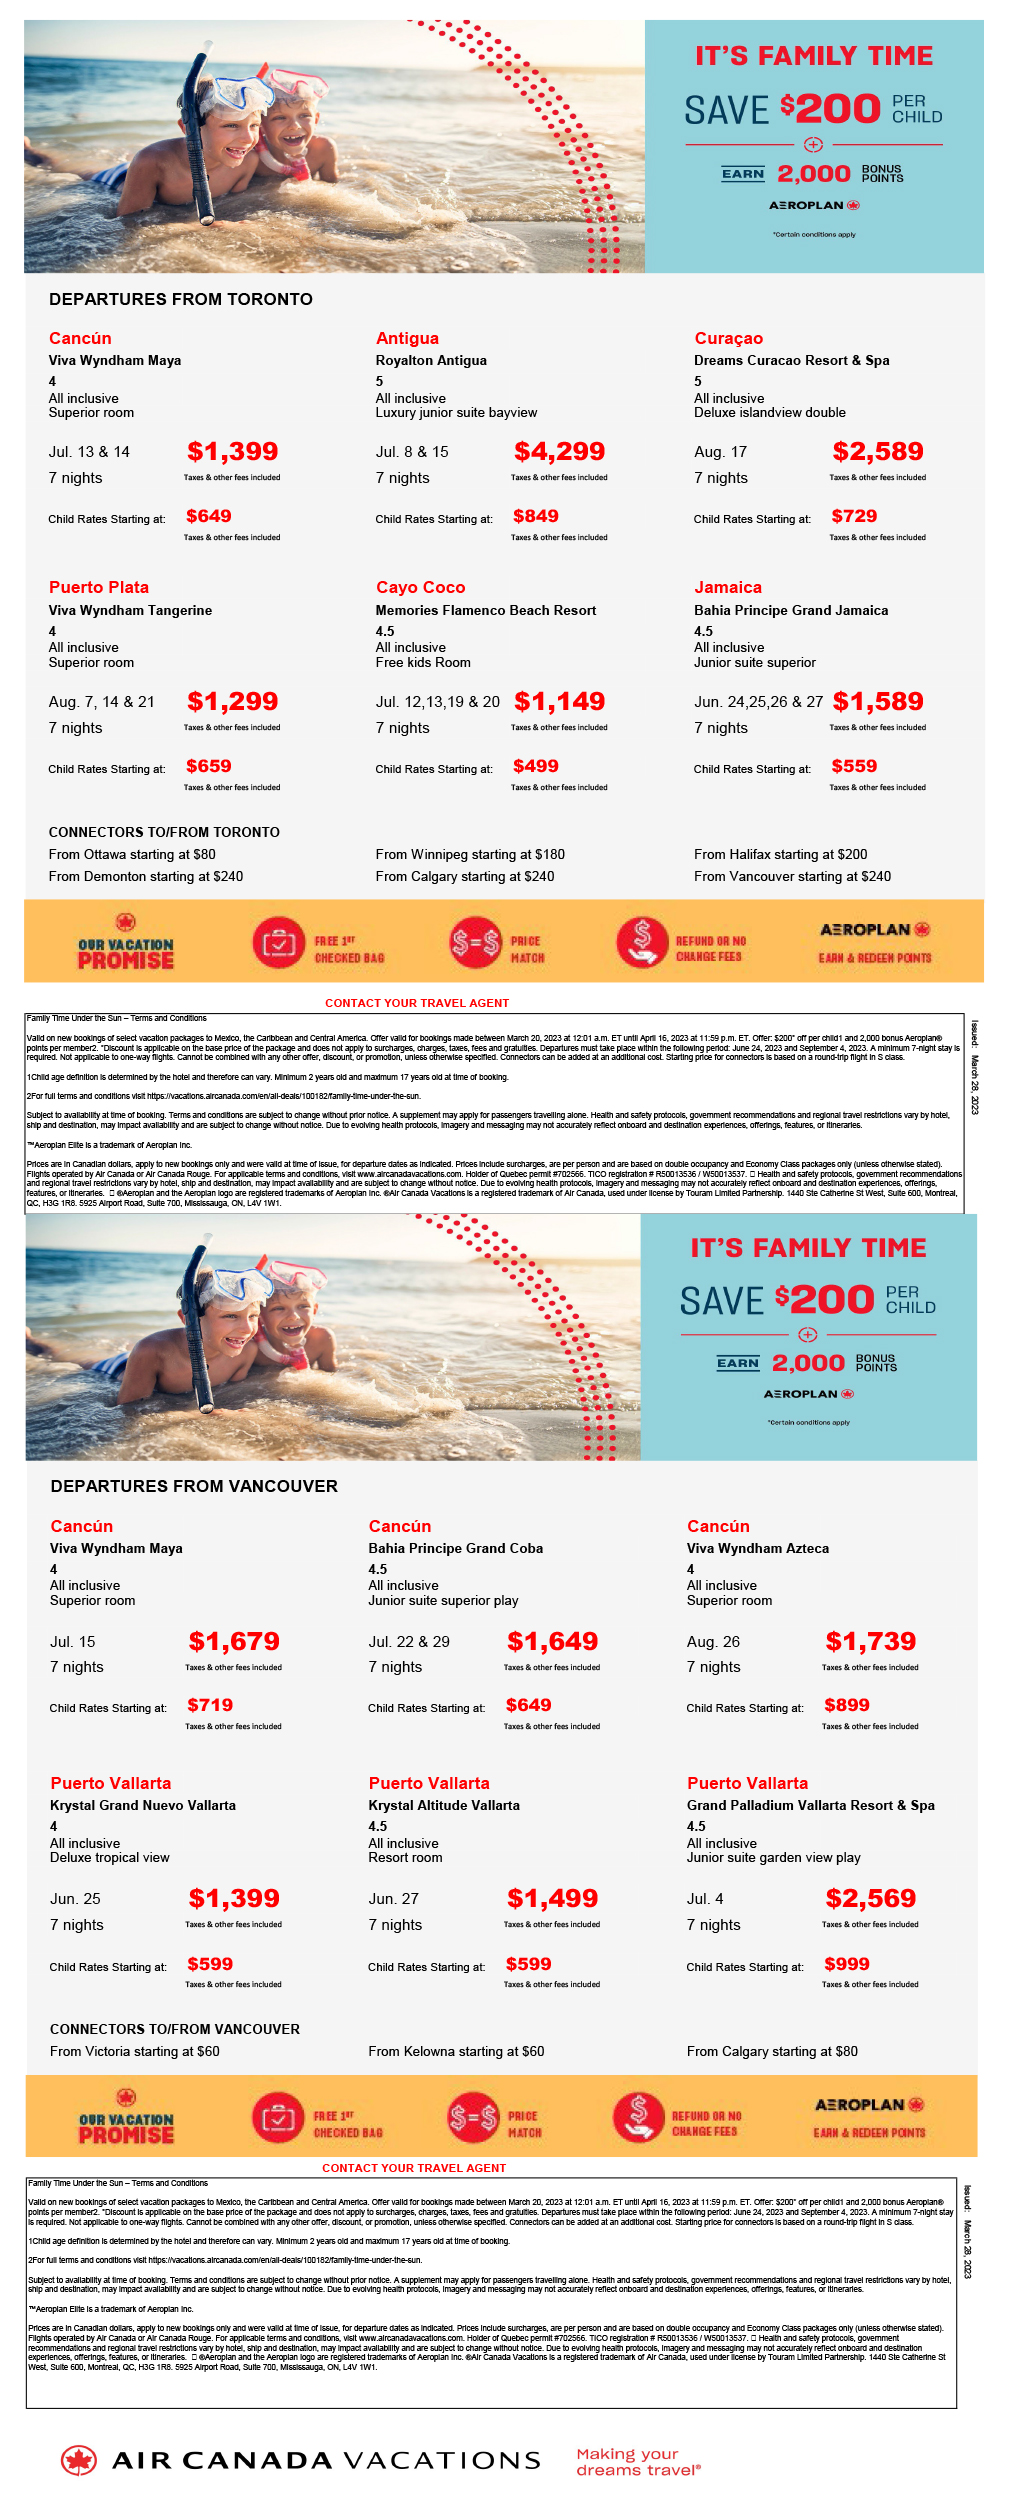 Family Vacations Packages With Air Canada Vacations